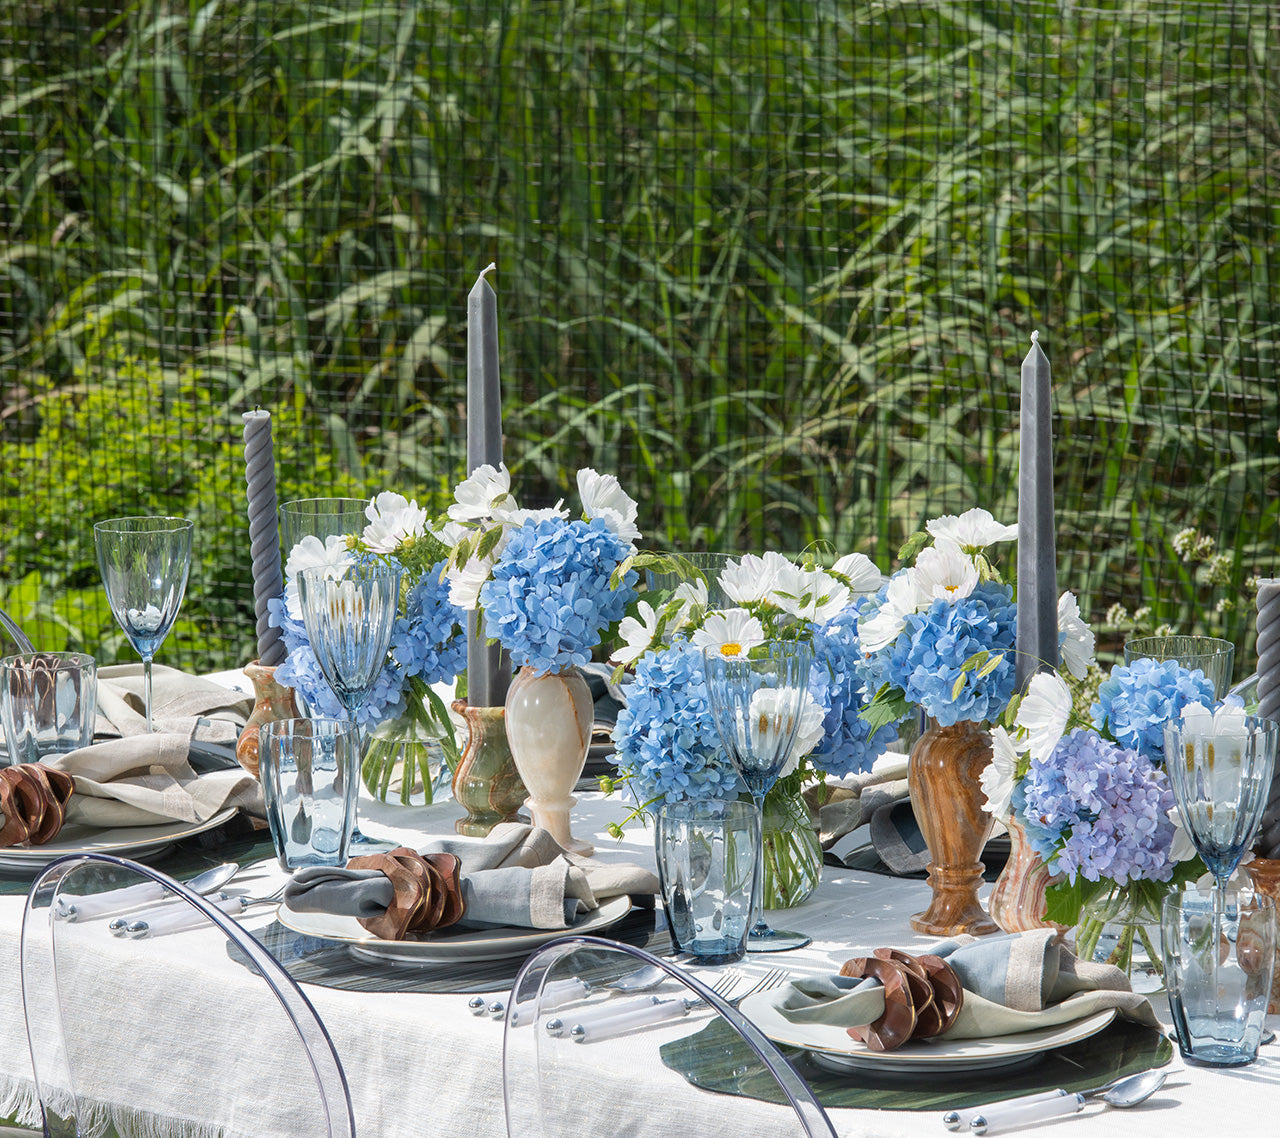 Outdoor table with vases of blue hydrangea and place settings with brown napkin rings and Dip Dye Napkins in natural & seafoam 